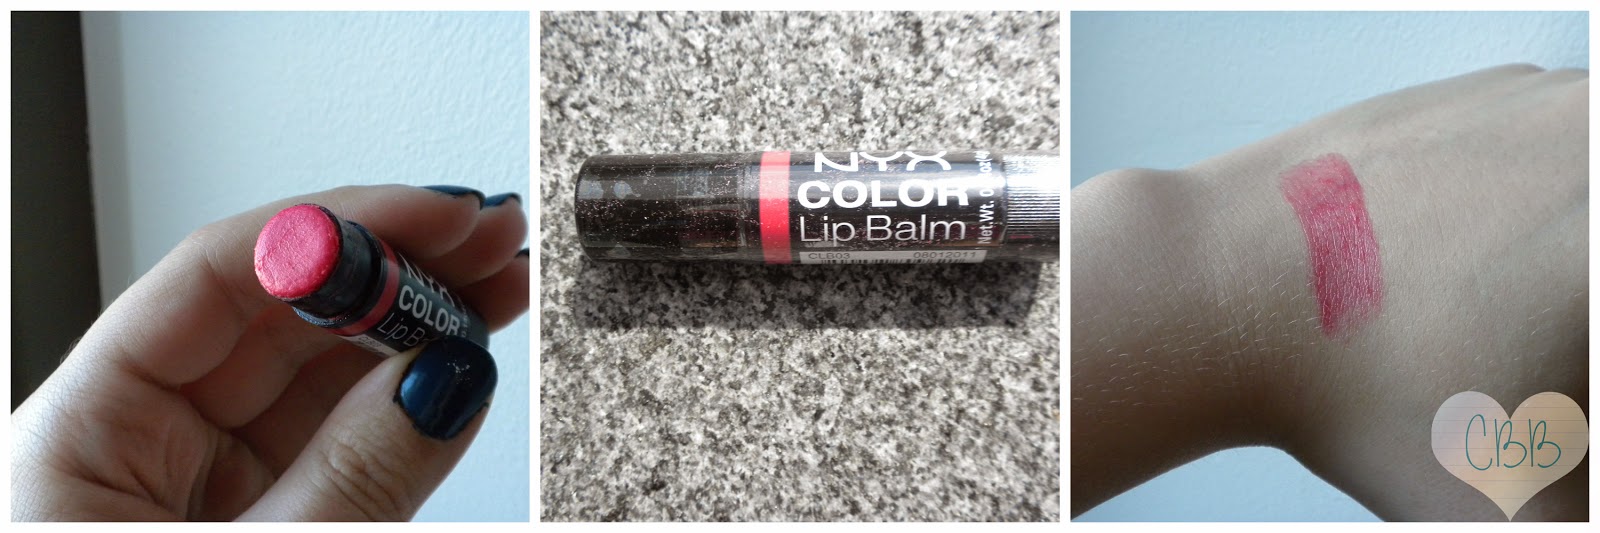 NYX Color Lip Balm in Thank You ($3.75 for .14oz)